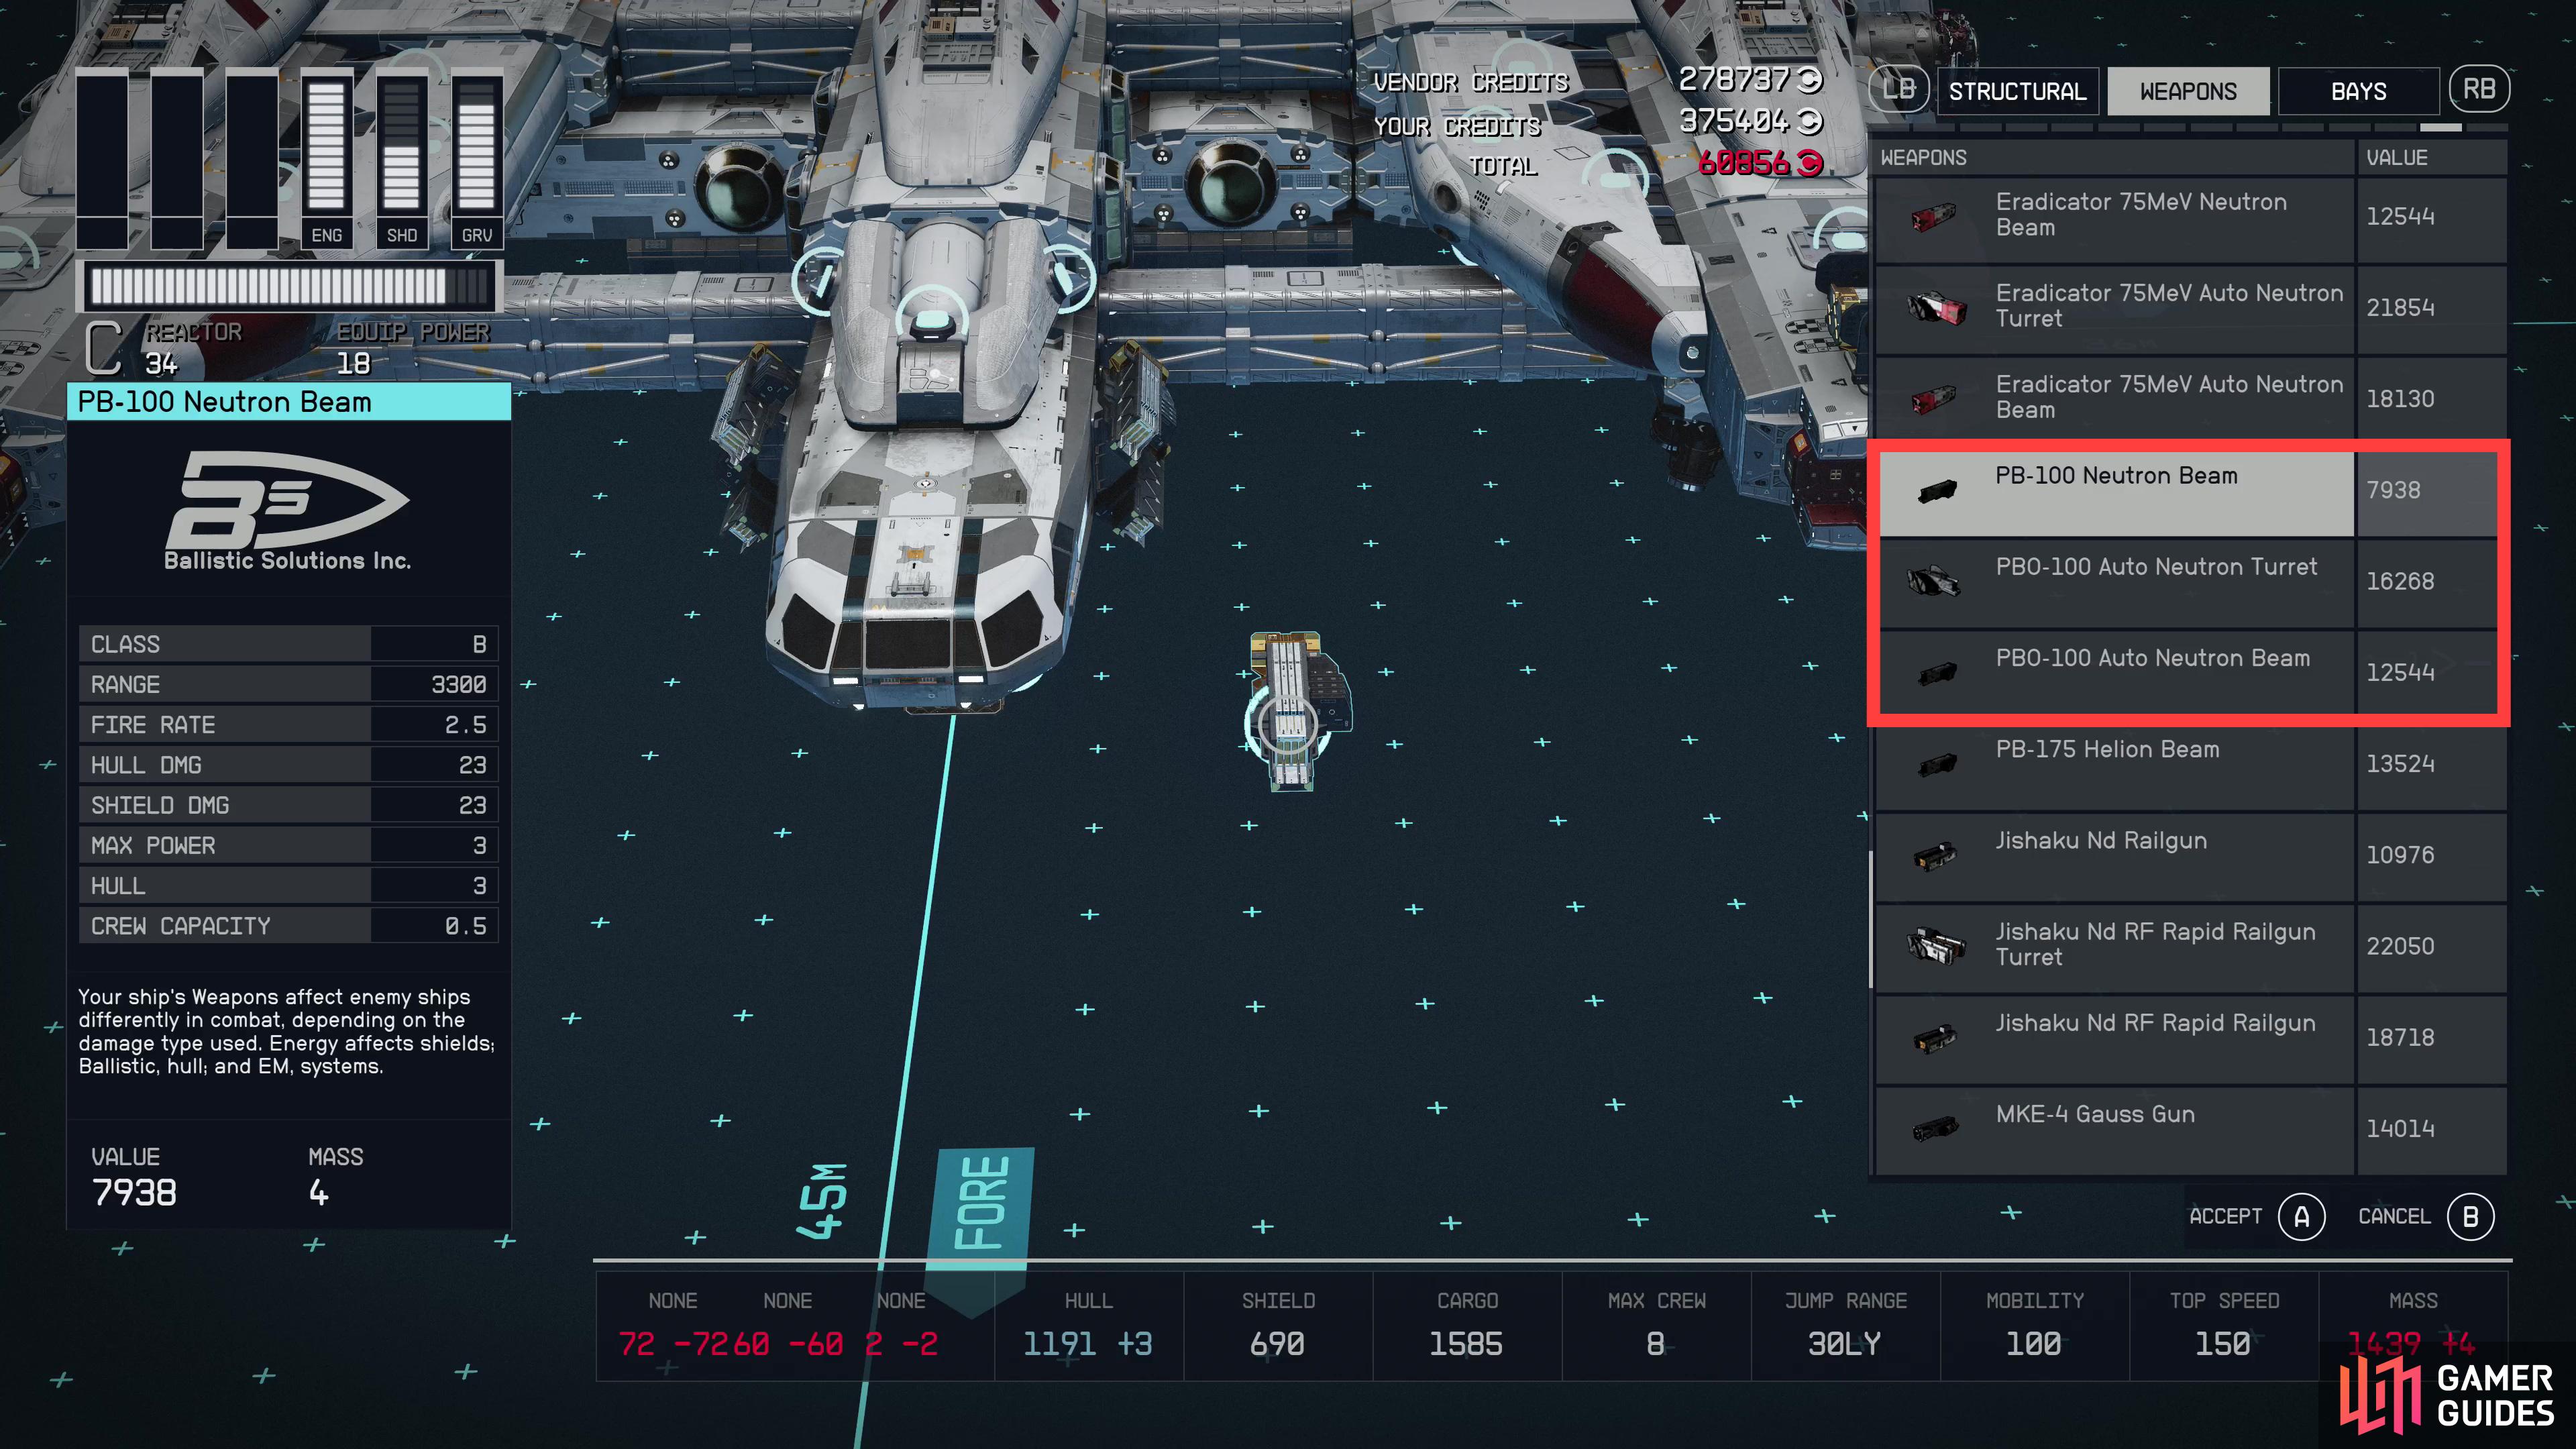 Some ship weapons may come in different variants - standard, auto/pulse, and turret. The particle weapon listed here has all three such variants.